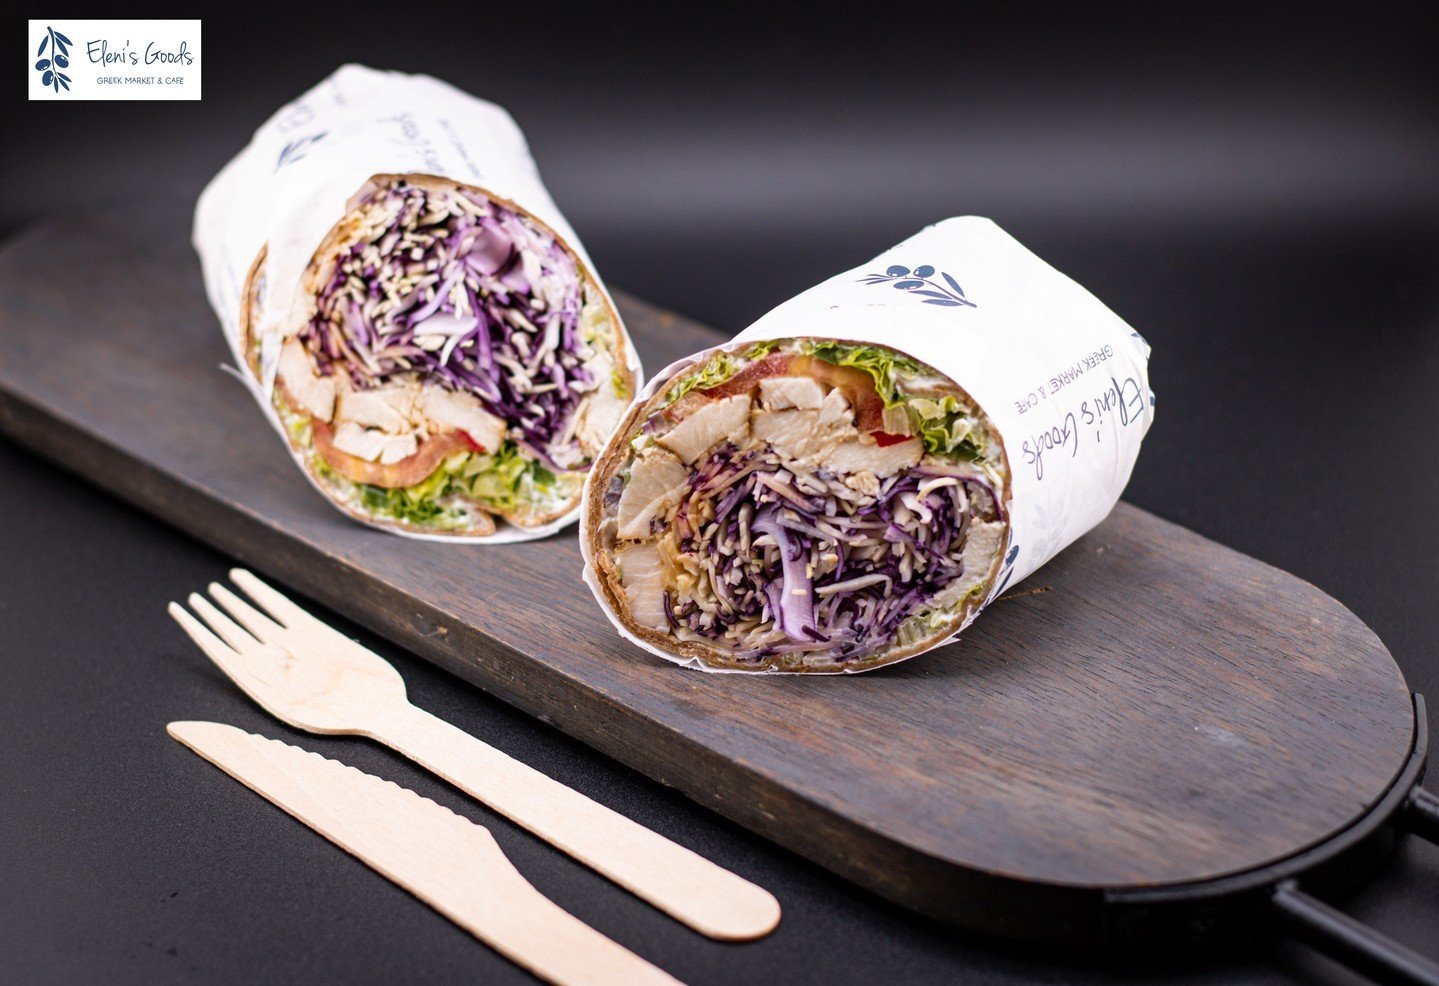 avor the flavors of our mouthwatering wraps! 🌯😋 Whether you're craving veggie goodness, succulent salmon, or juicy chicken, our wraps are packed with fresh ingredients and bold flavors. Take your taste buds on a journey! #ElenisCafe #Elenisgoods #F